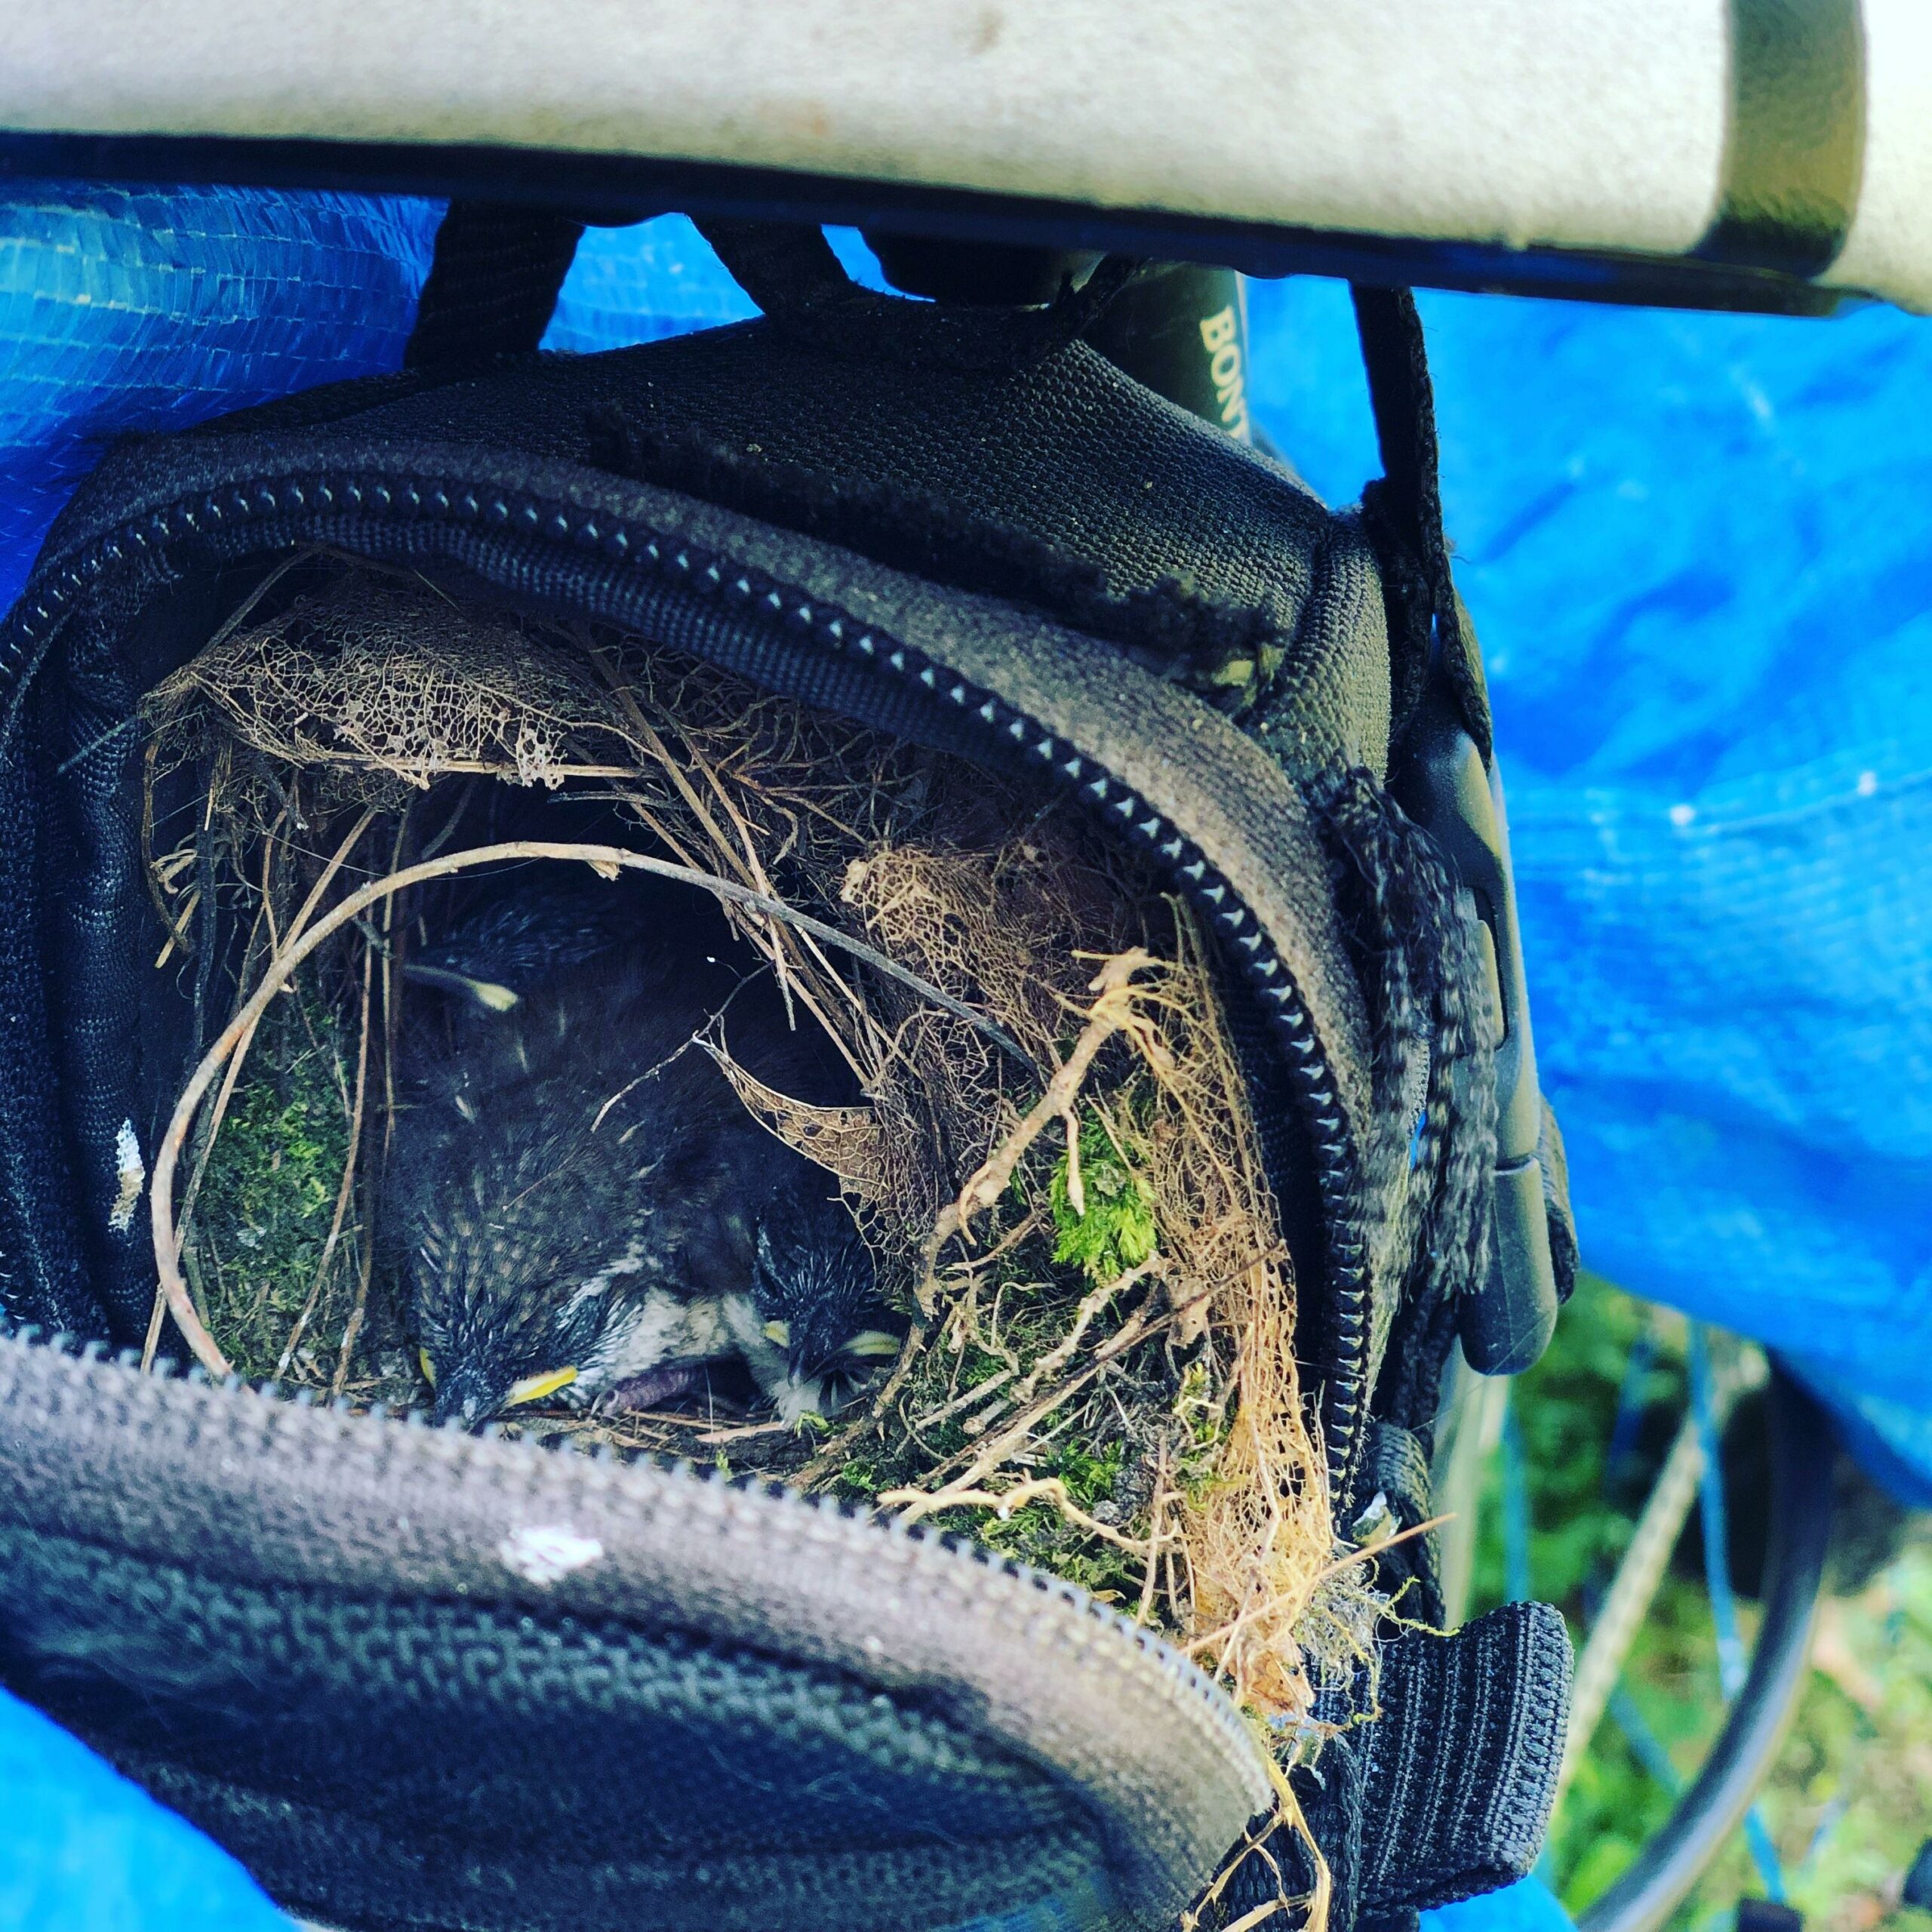 birds nesting inside backpack on bicycle